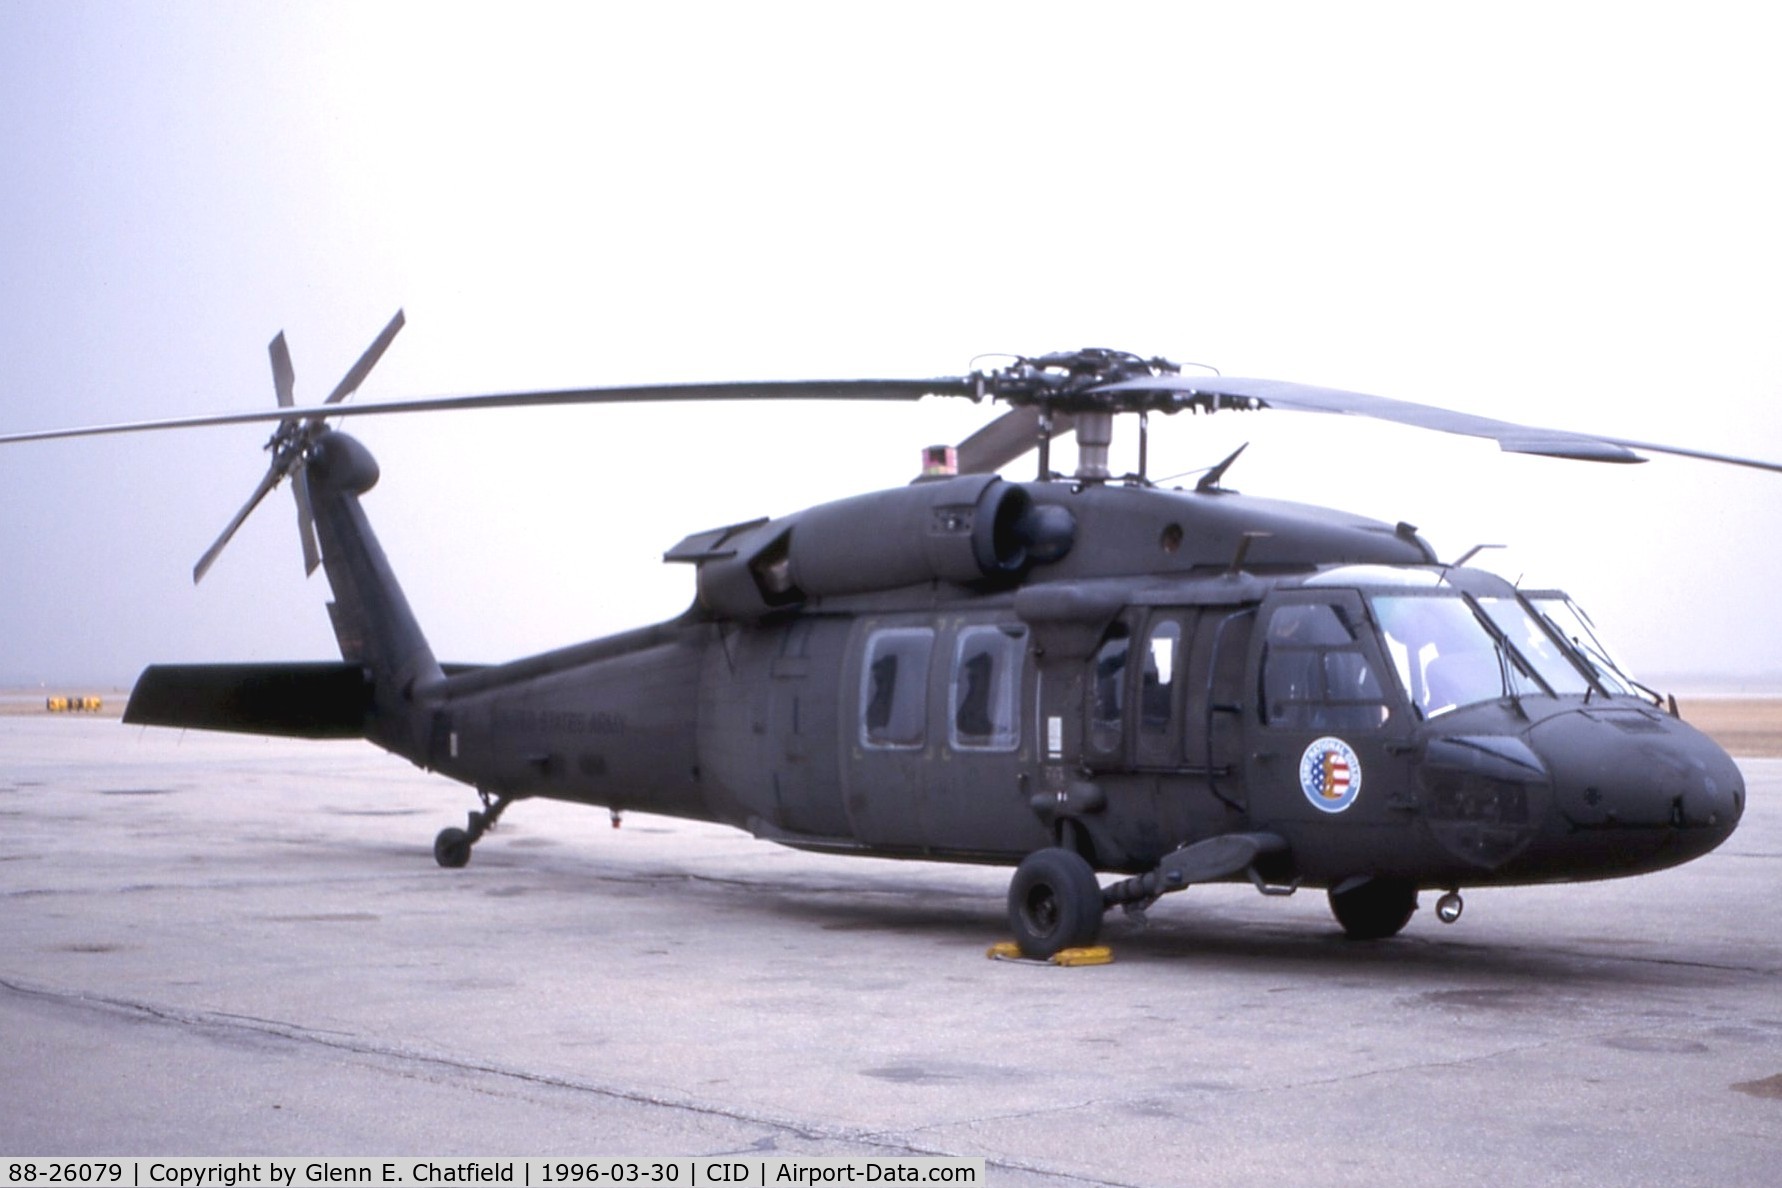 88-26079, 1988 Sikorsky UH-60A Black Hawk C/N 70.1312, Just stopping over